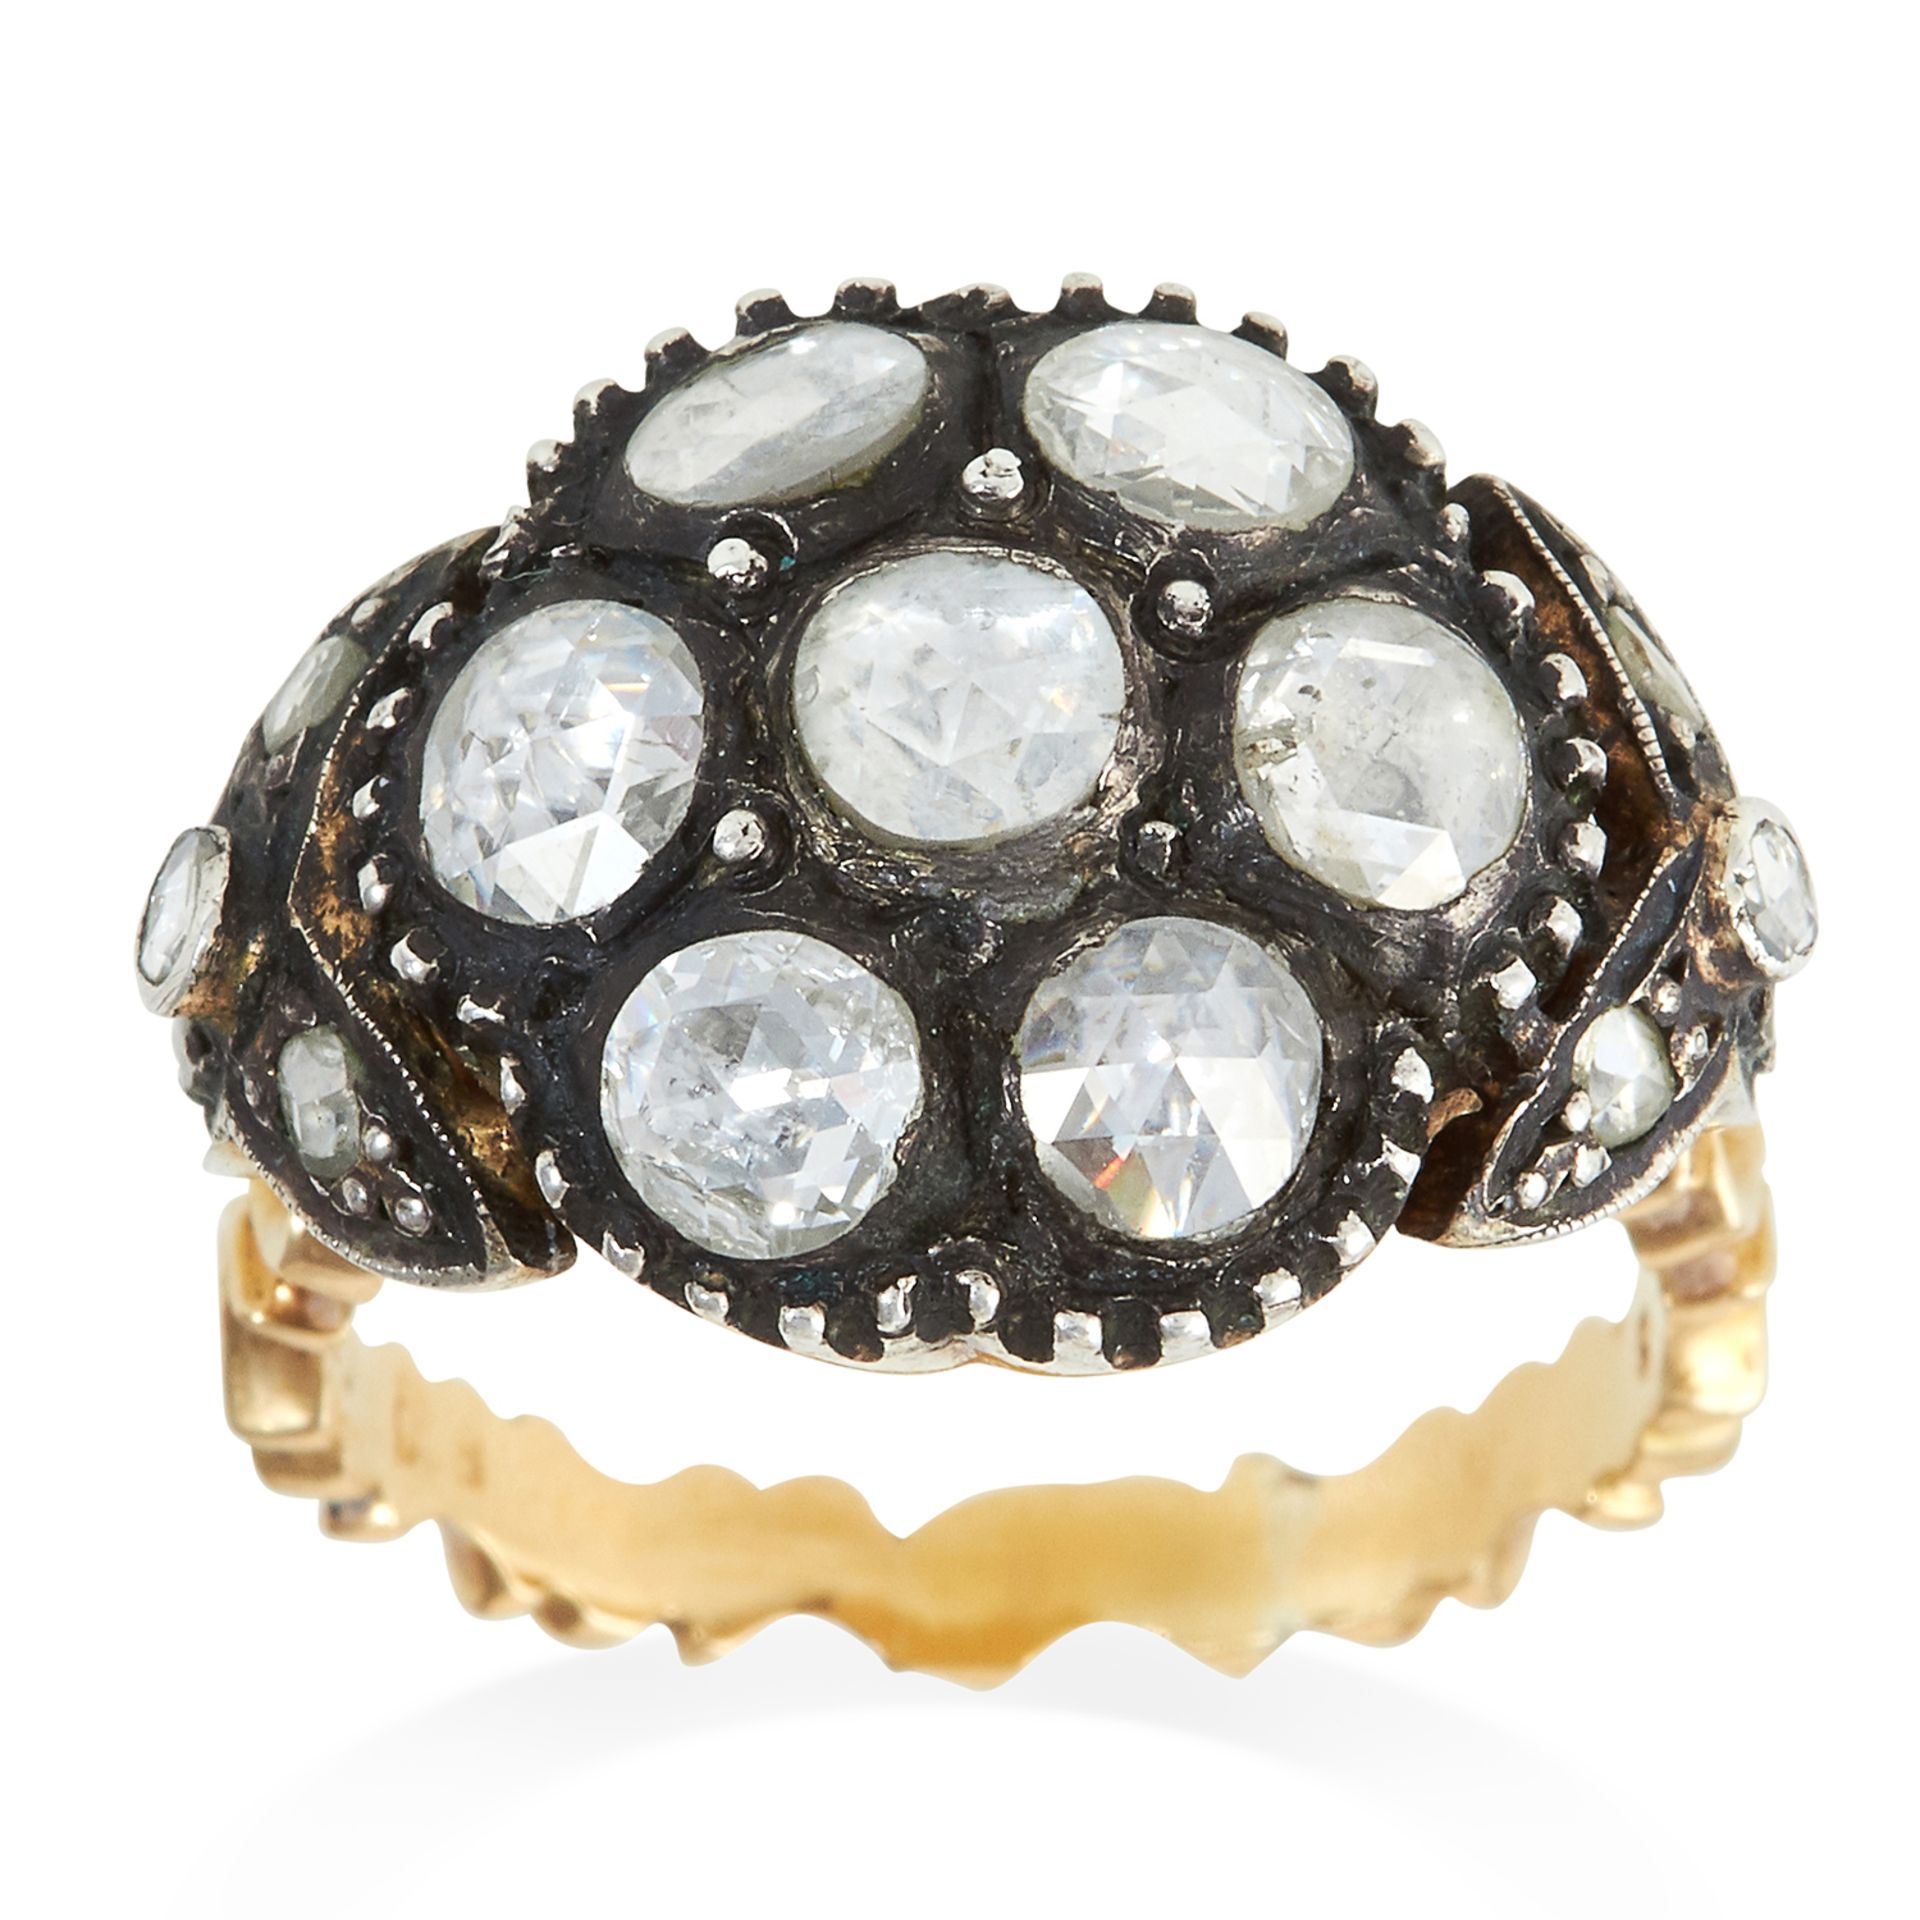 AN ANTIQUE DIAMOND CLUSTER RING, 19TH CENTURY set with seven rose cut diamonds accented by smaller